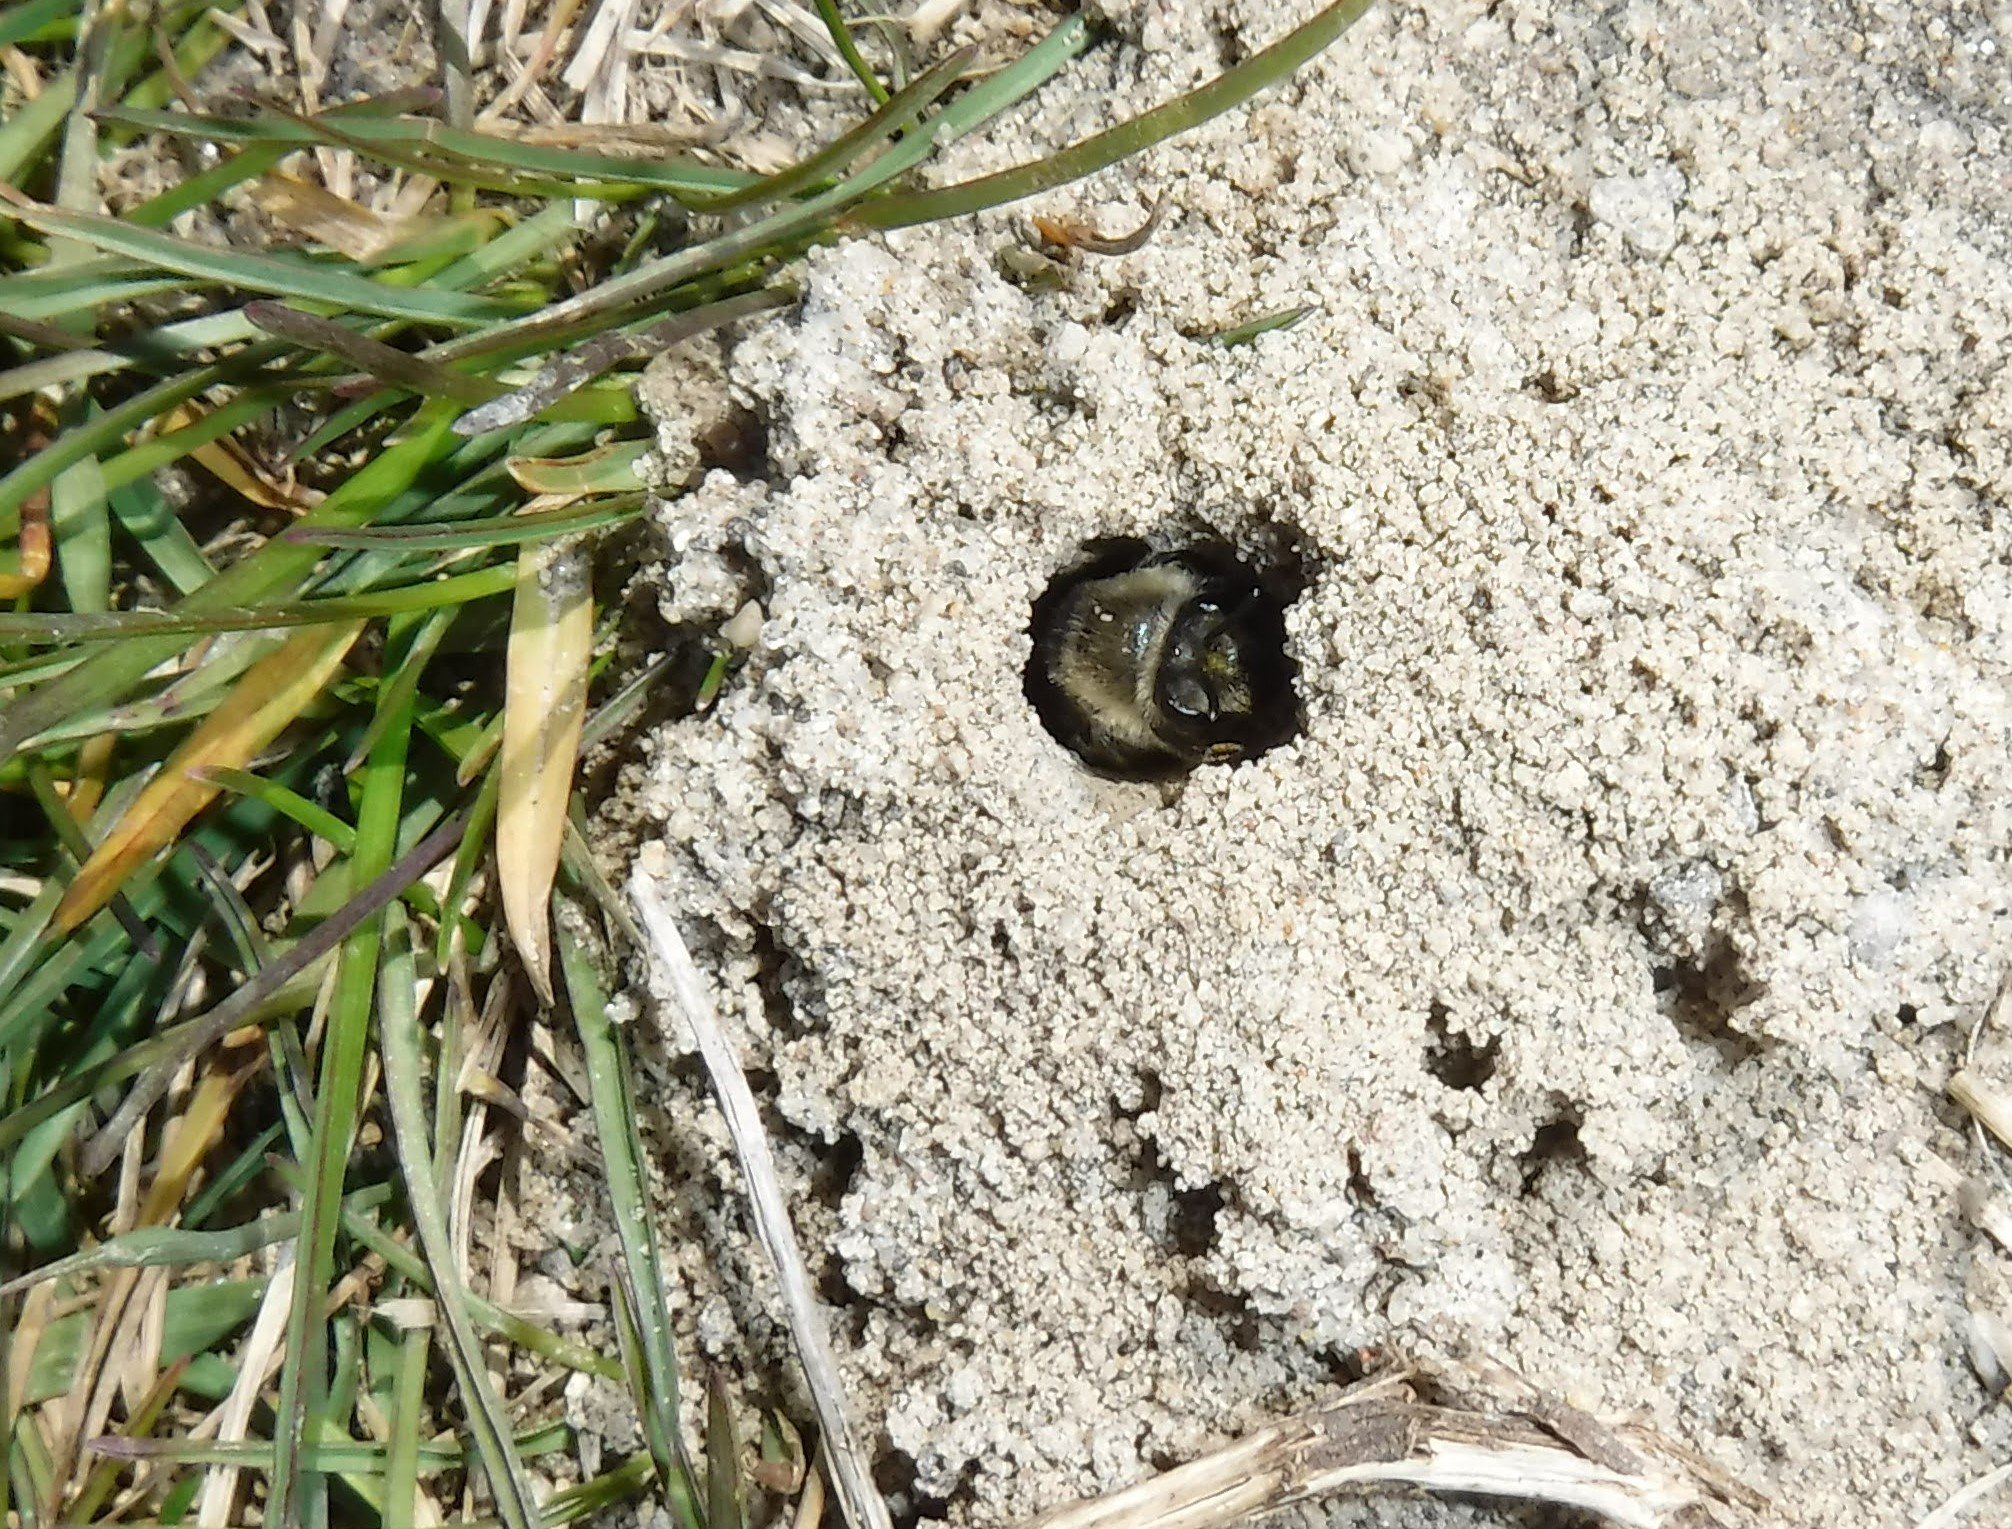 A Mining Bee Mother guards her nest